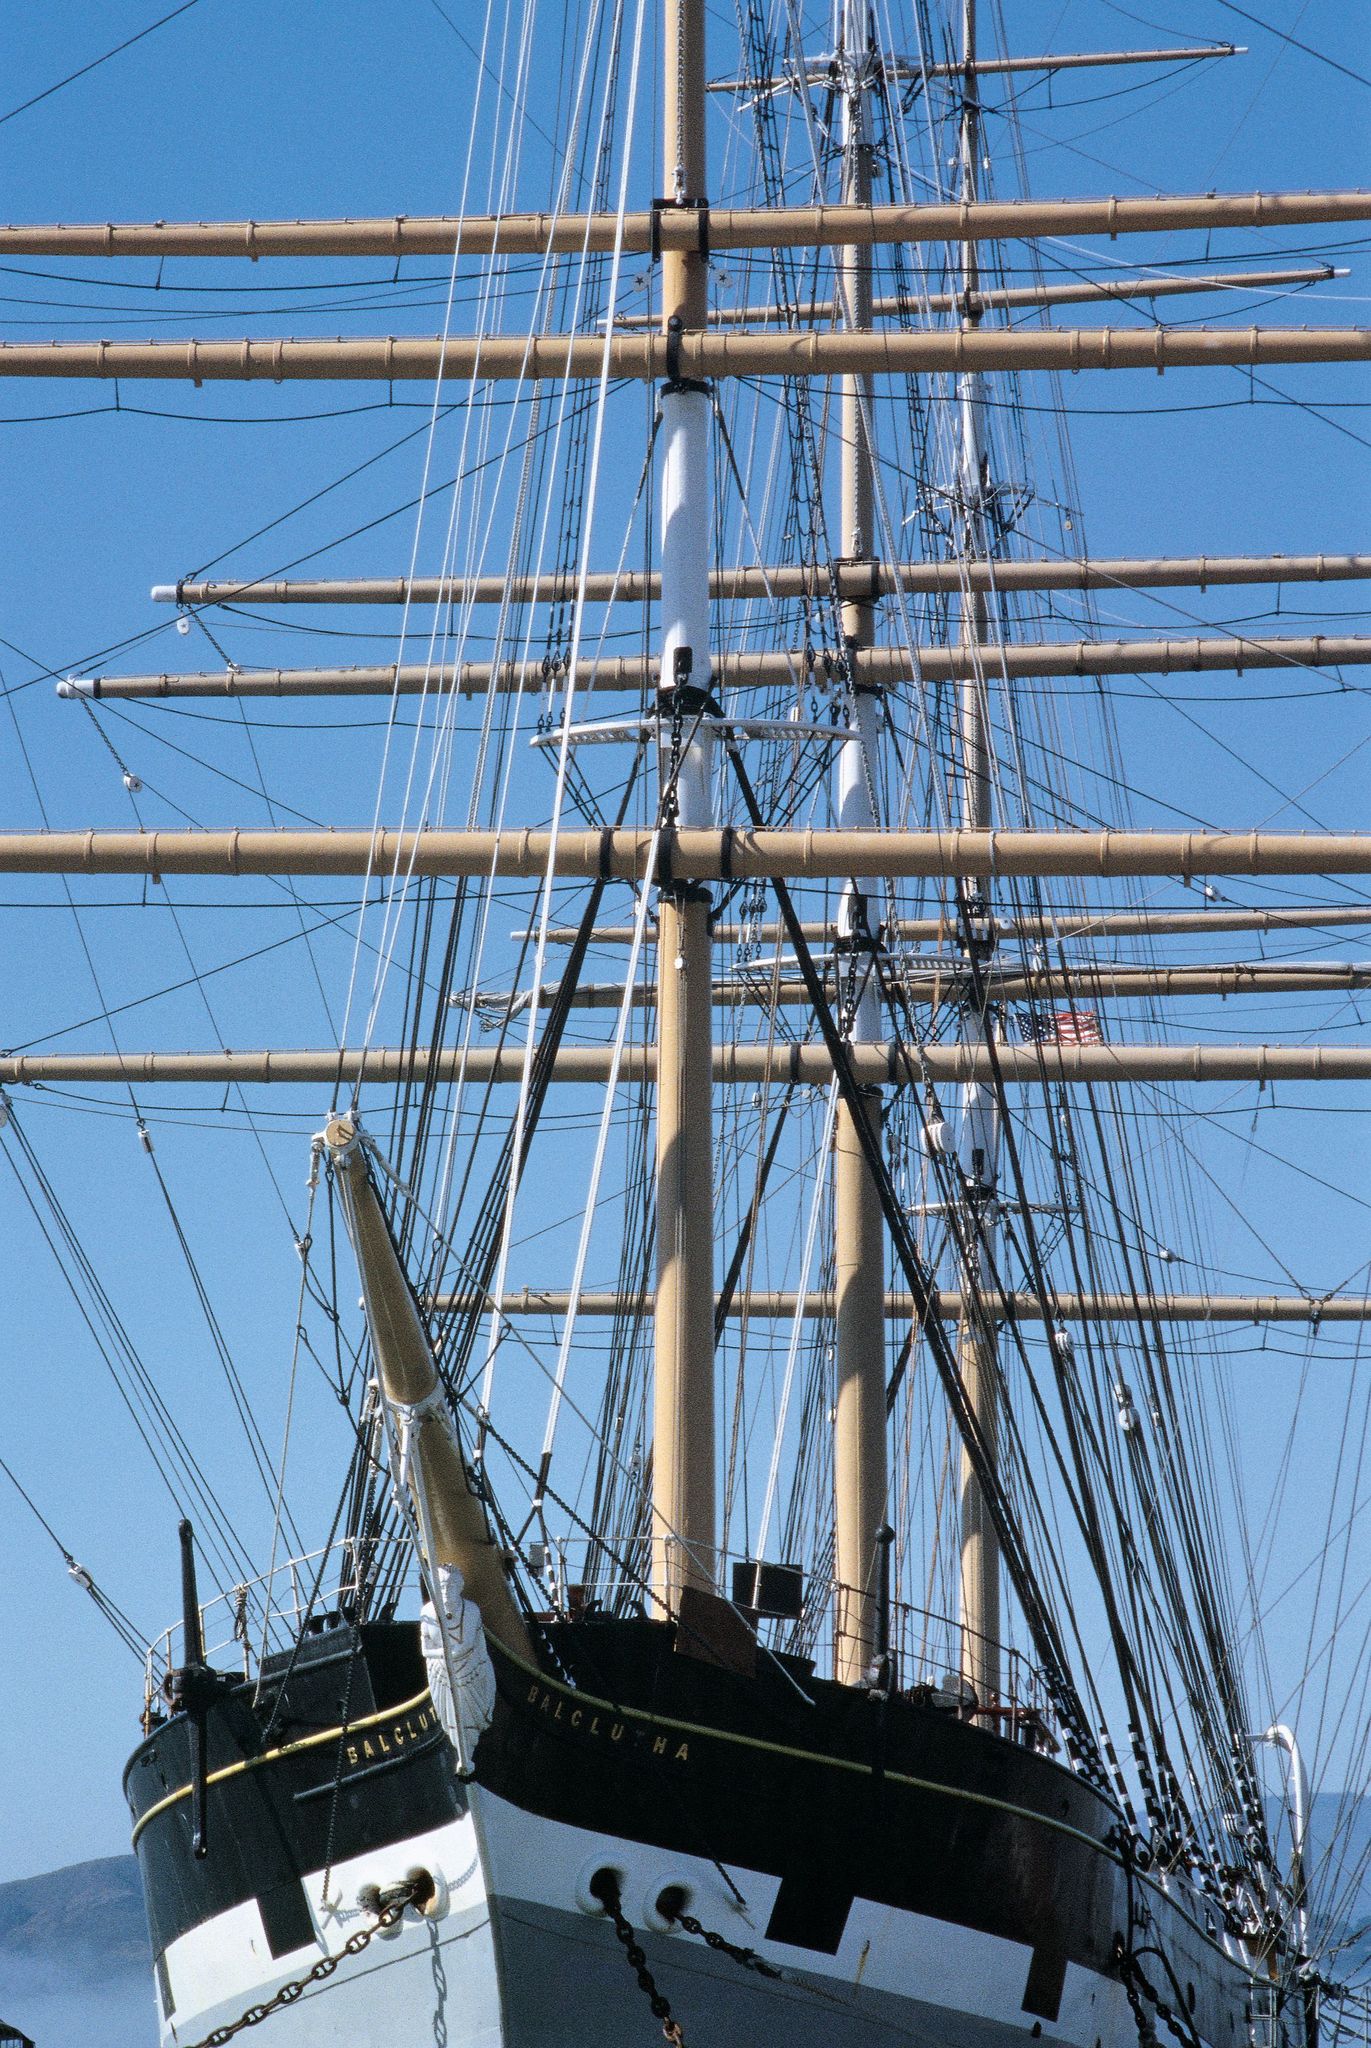 The 1886 square-rigged Balclutha is moored at Hyde Street Pier.